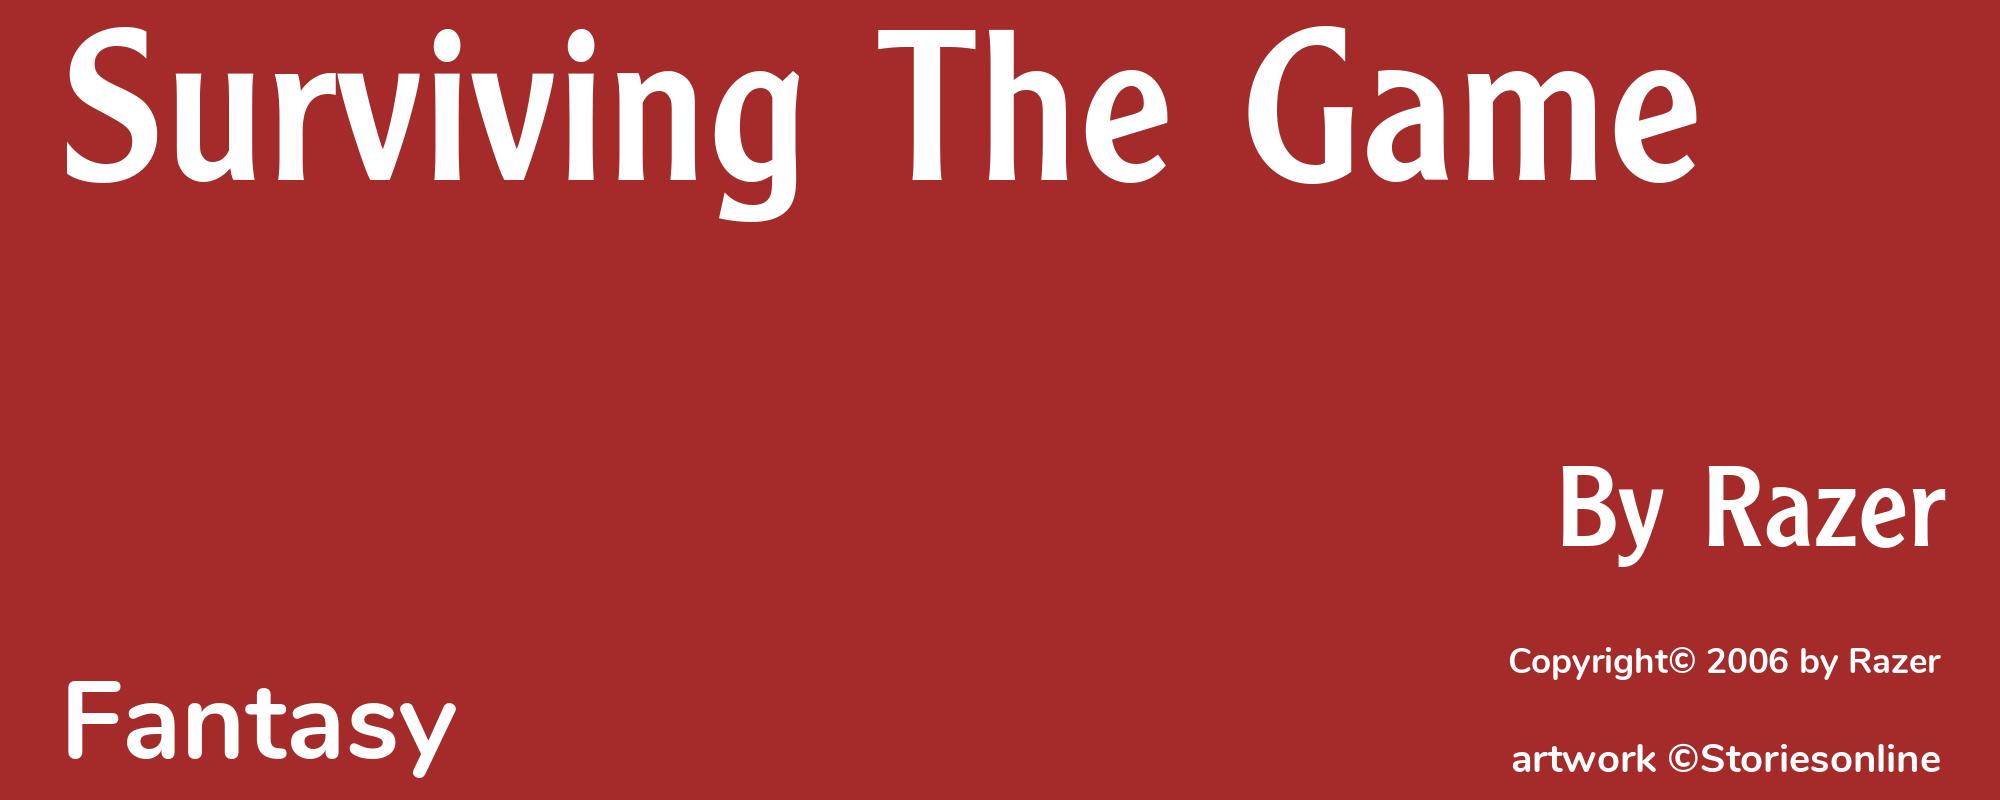 Surviving The Game - Cover